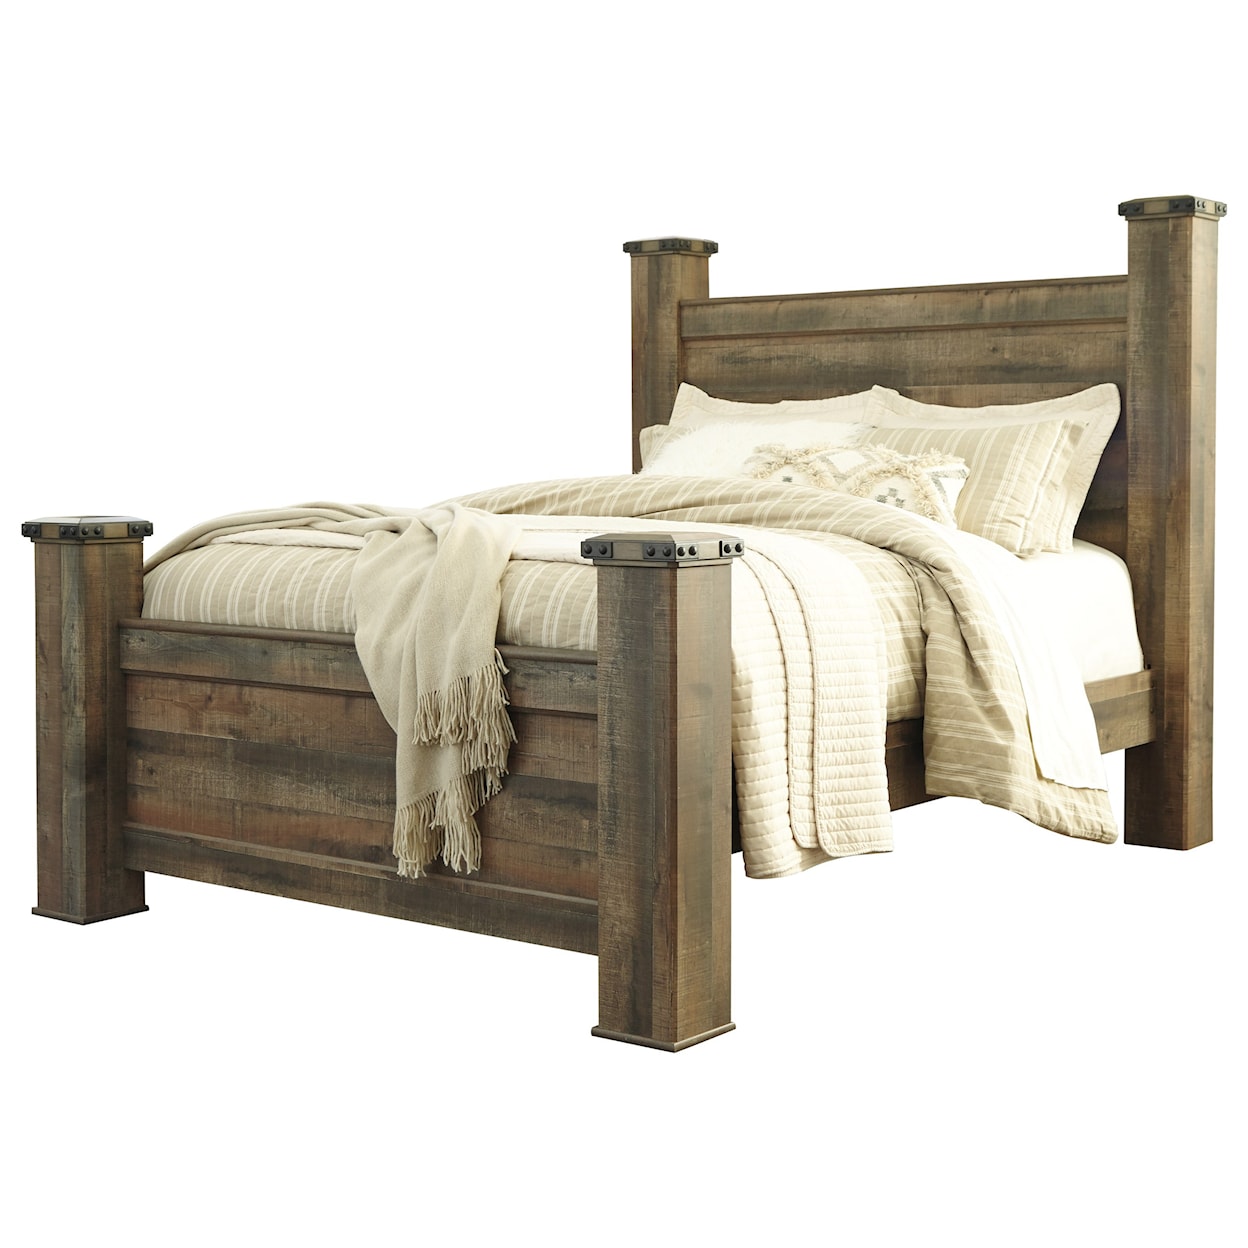 Signature Design by Ashley Trinell Queen Poster Bed